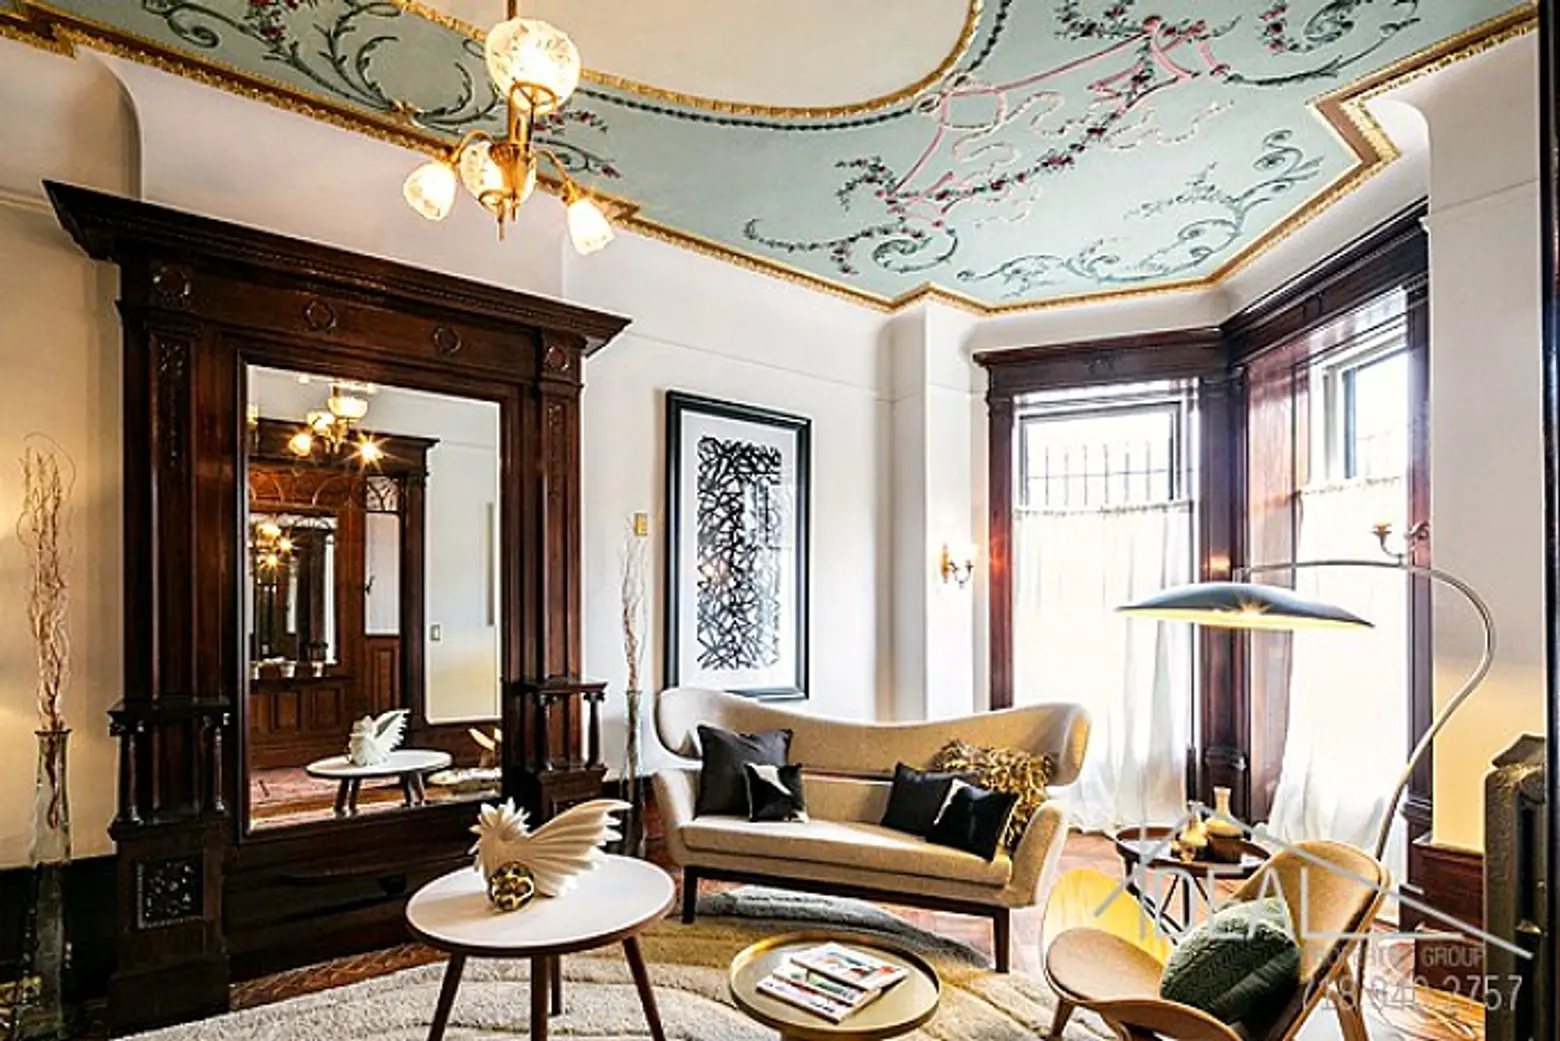 Spectacular Park Slope Mansion Comes with Private Parking and a Twice-Reduced Price